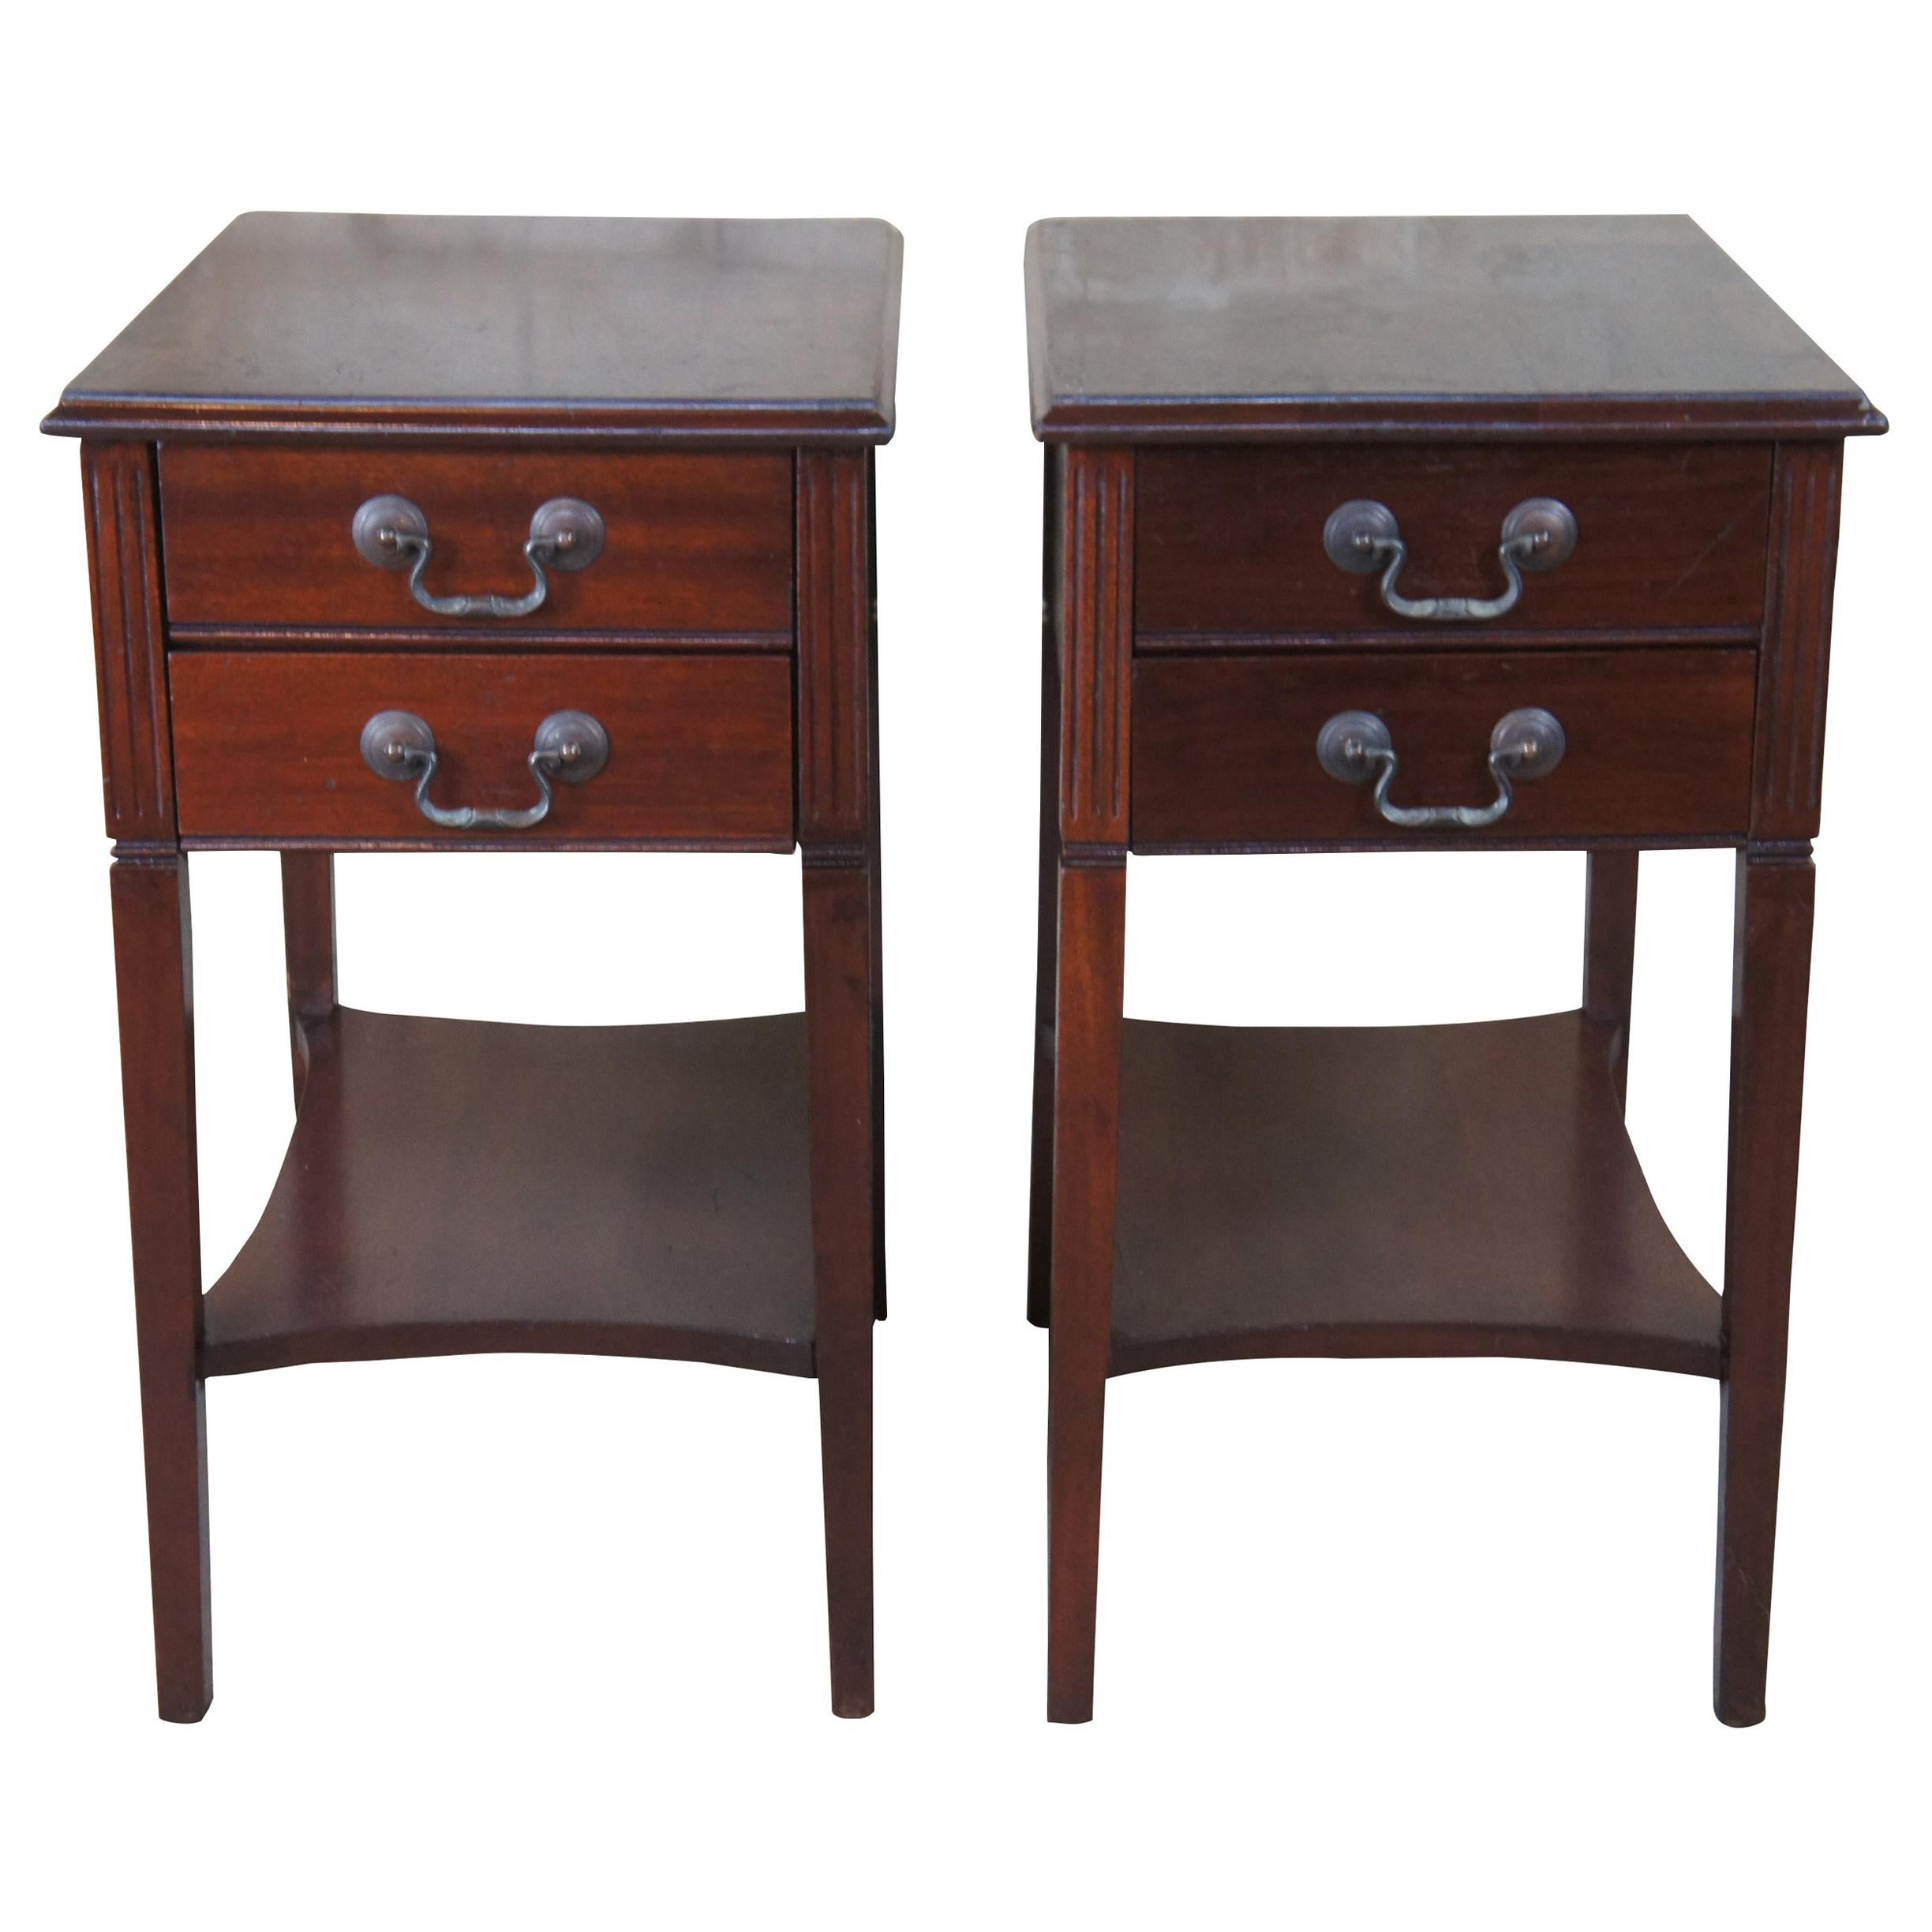 2 N. Snellenburg & Co Sheraton Mahogany Nighstand Commode End Tables Mid Century